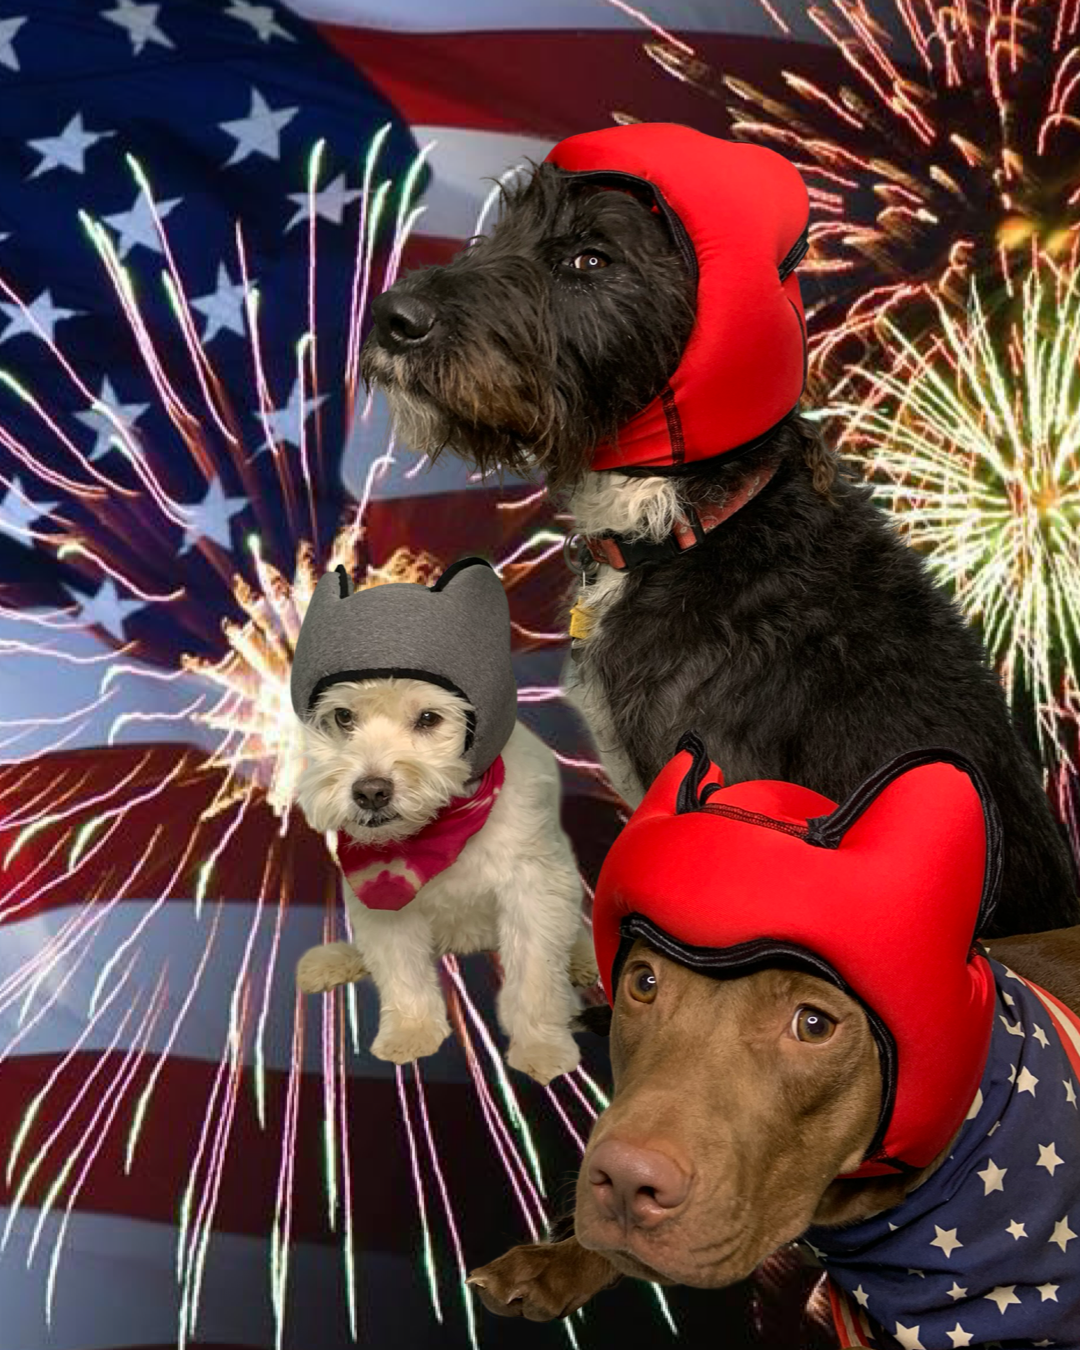 PAWNIX: preparing your dog for the Fourth of July